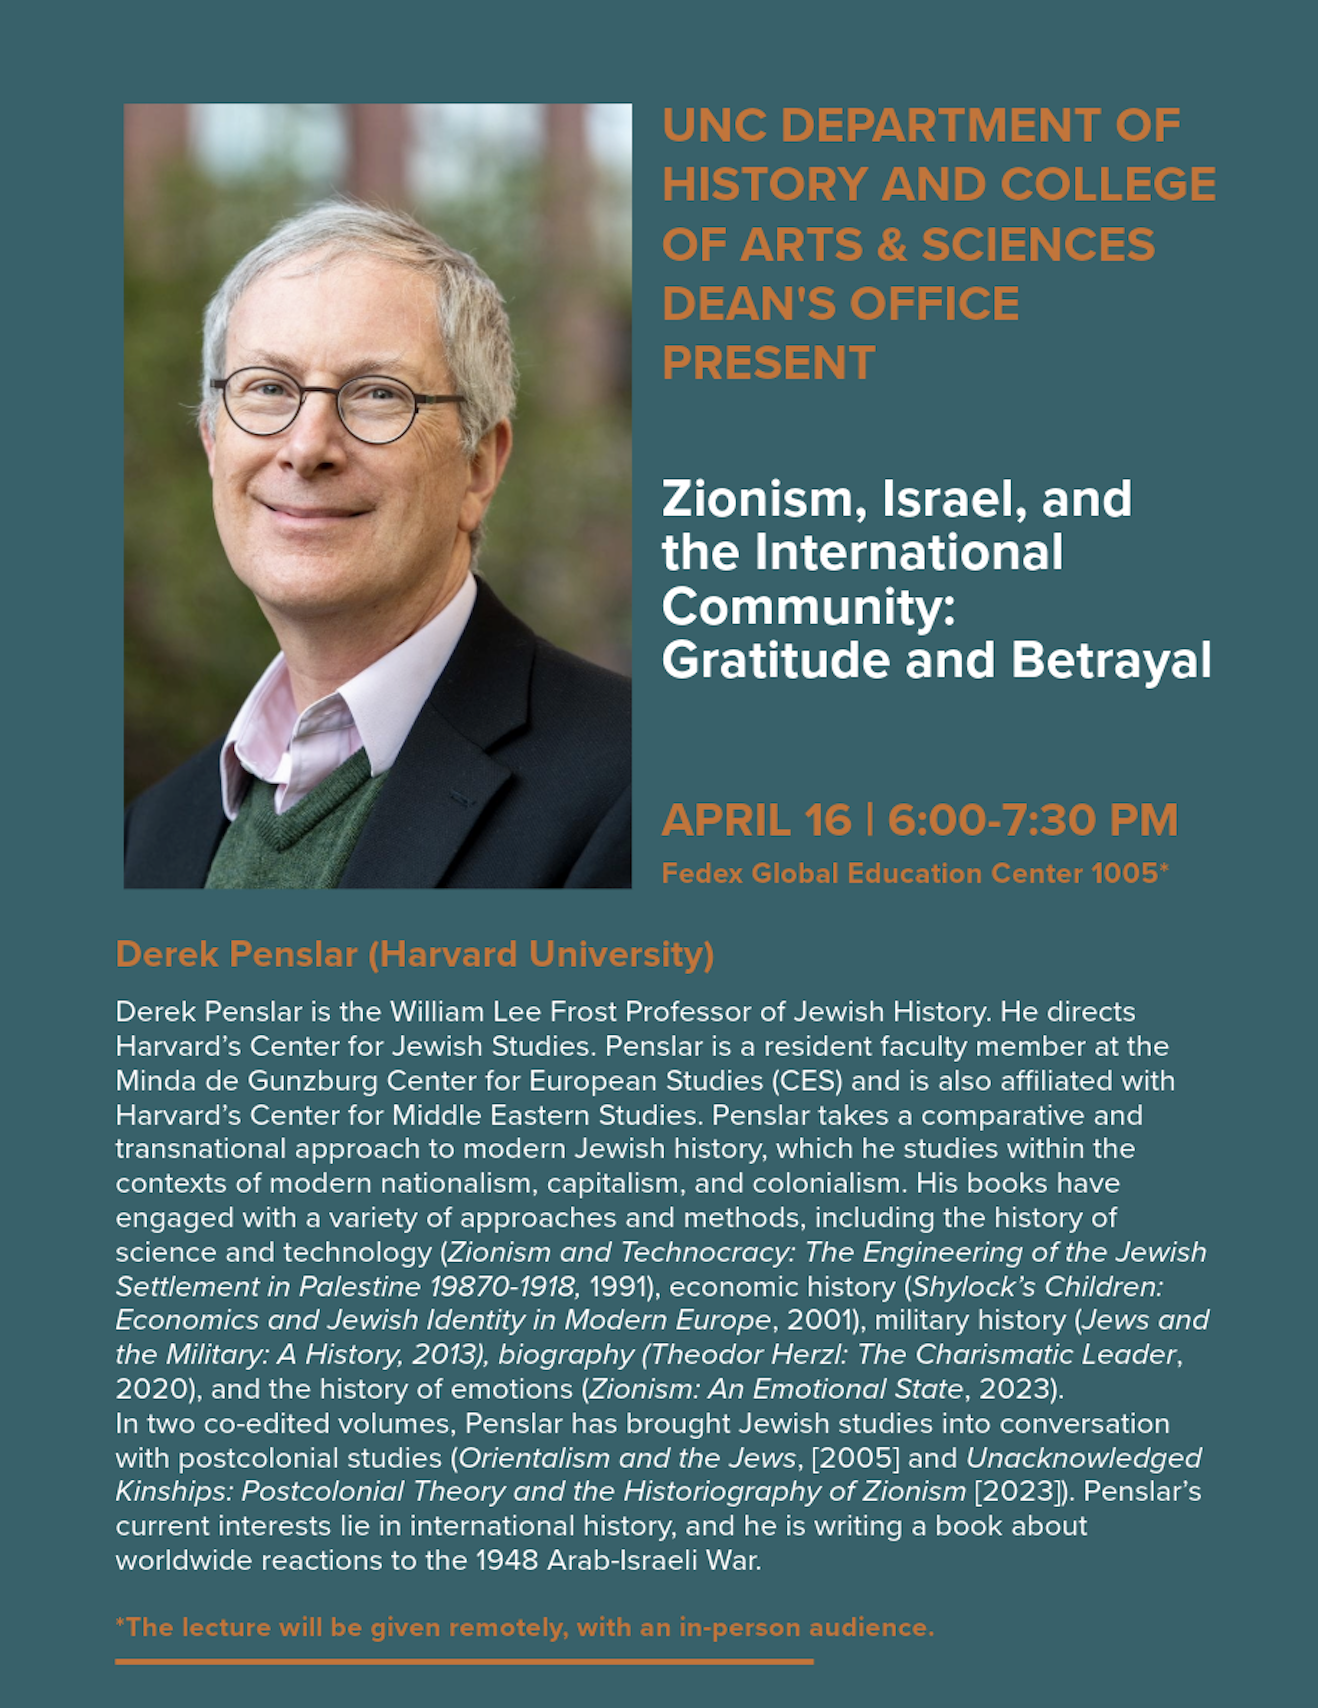 Flyer for "Zionism, Israel, and the International Community: Gratitude and Betrayal" event